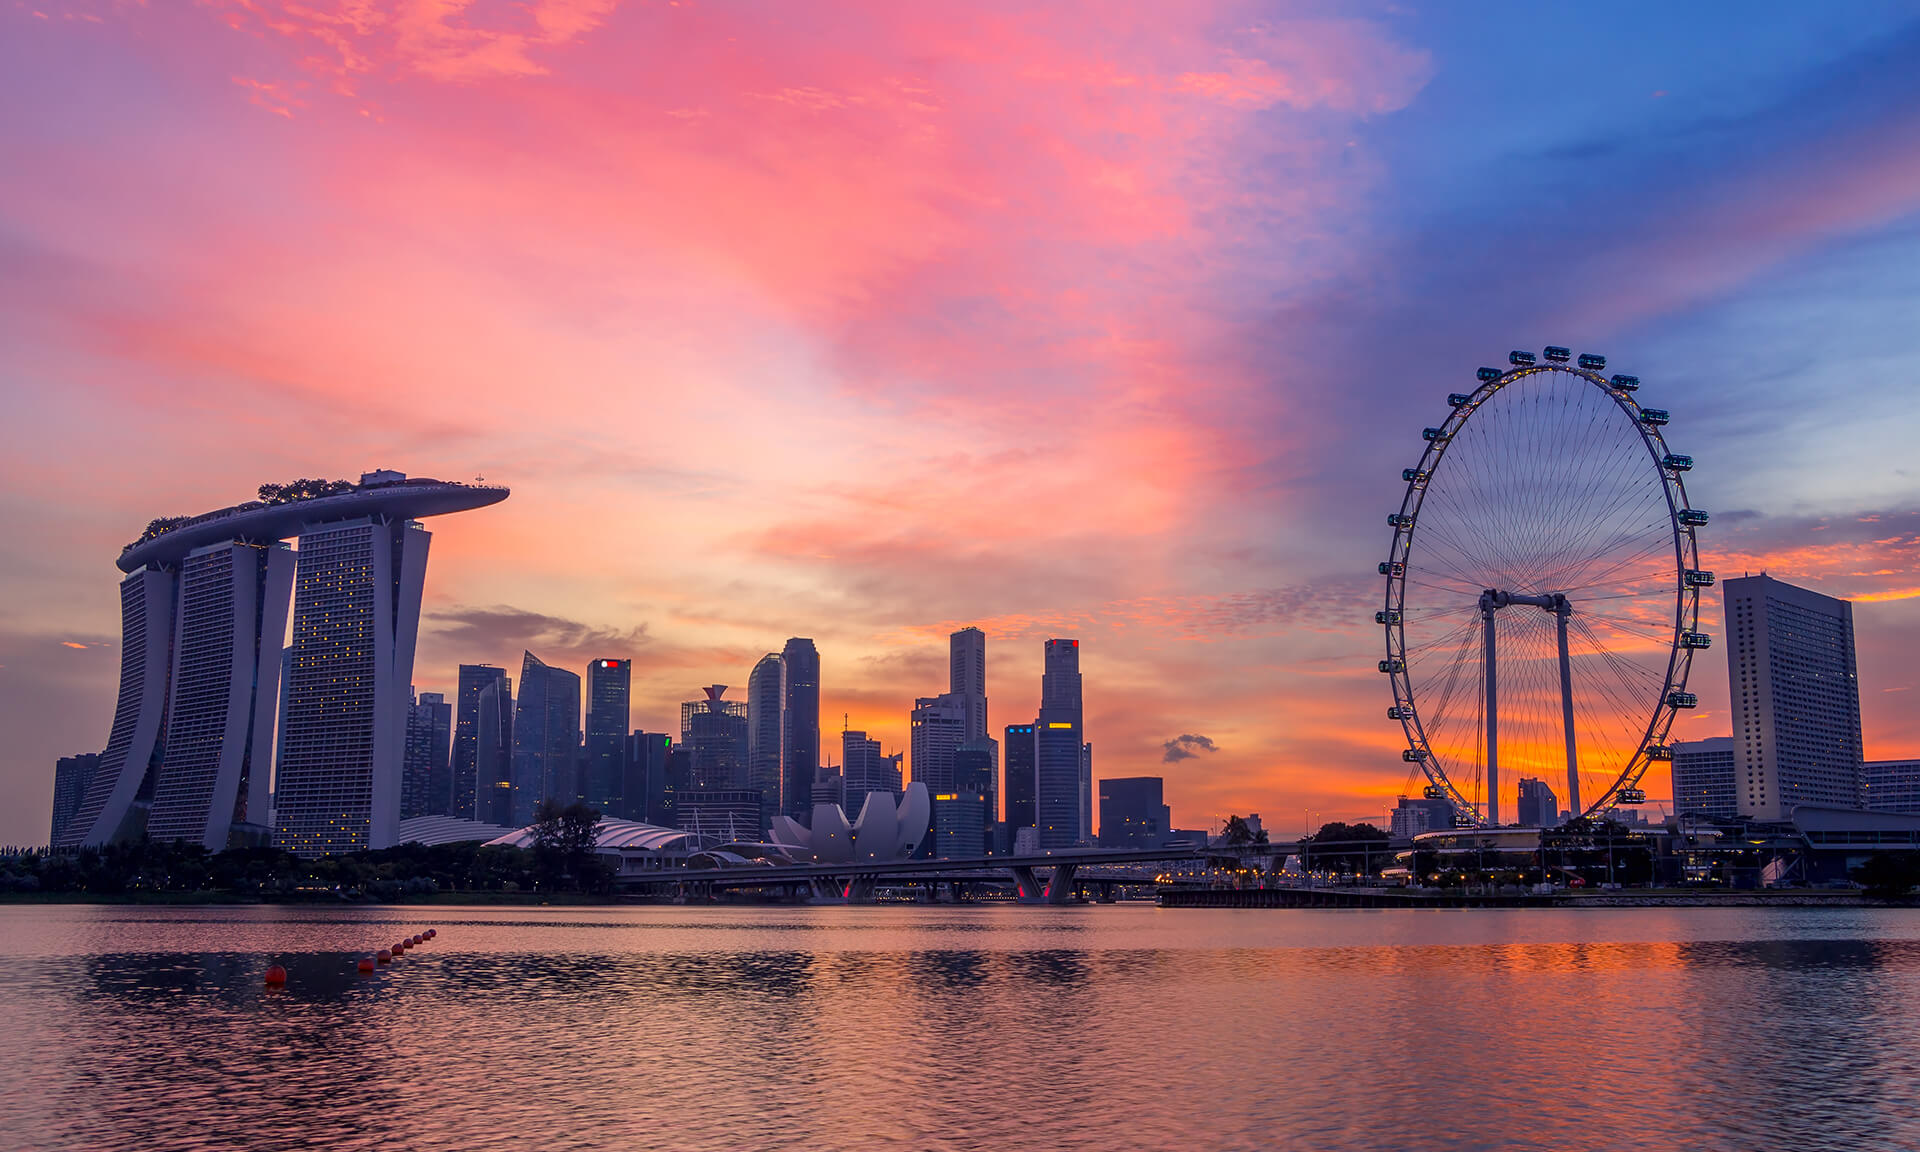 Millionaires are on the Move to Singapore – The Country Ranks 3rd in Attracting High Net Worth Individuals